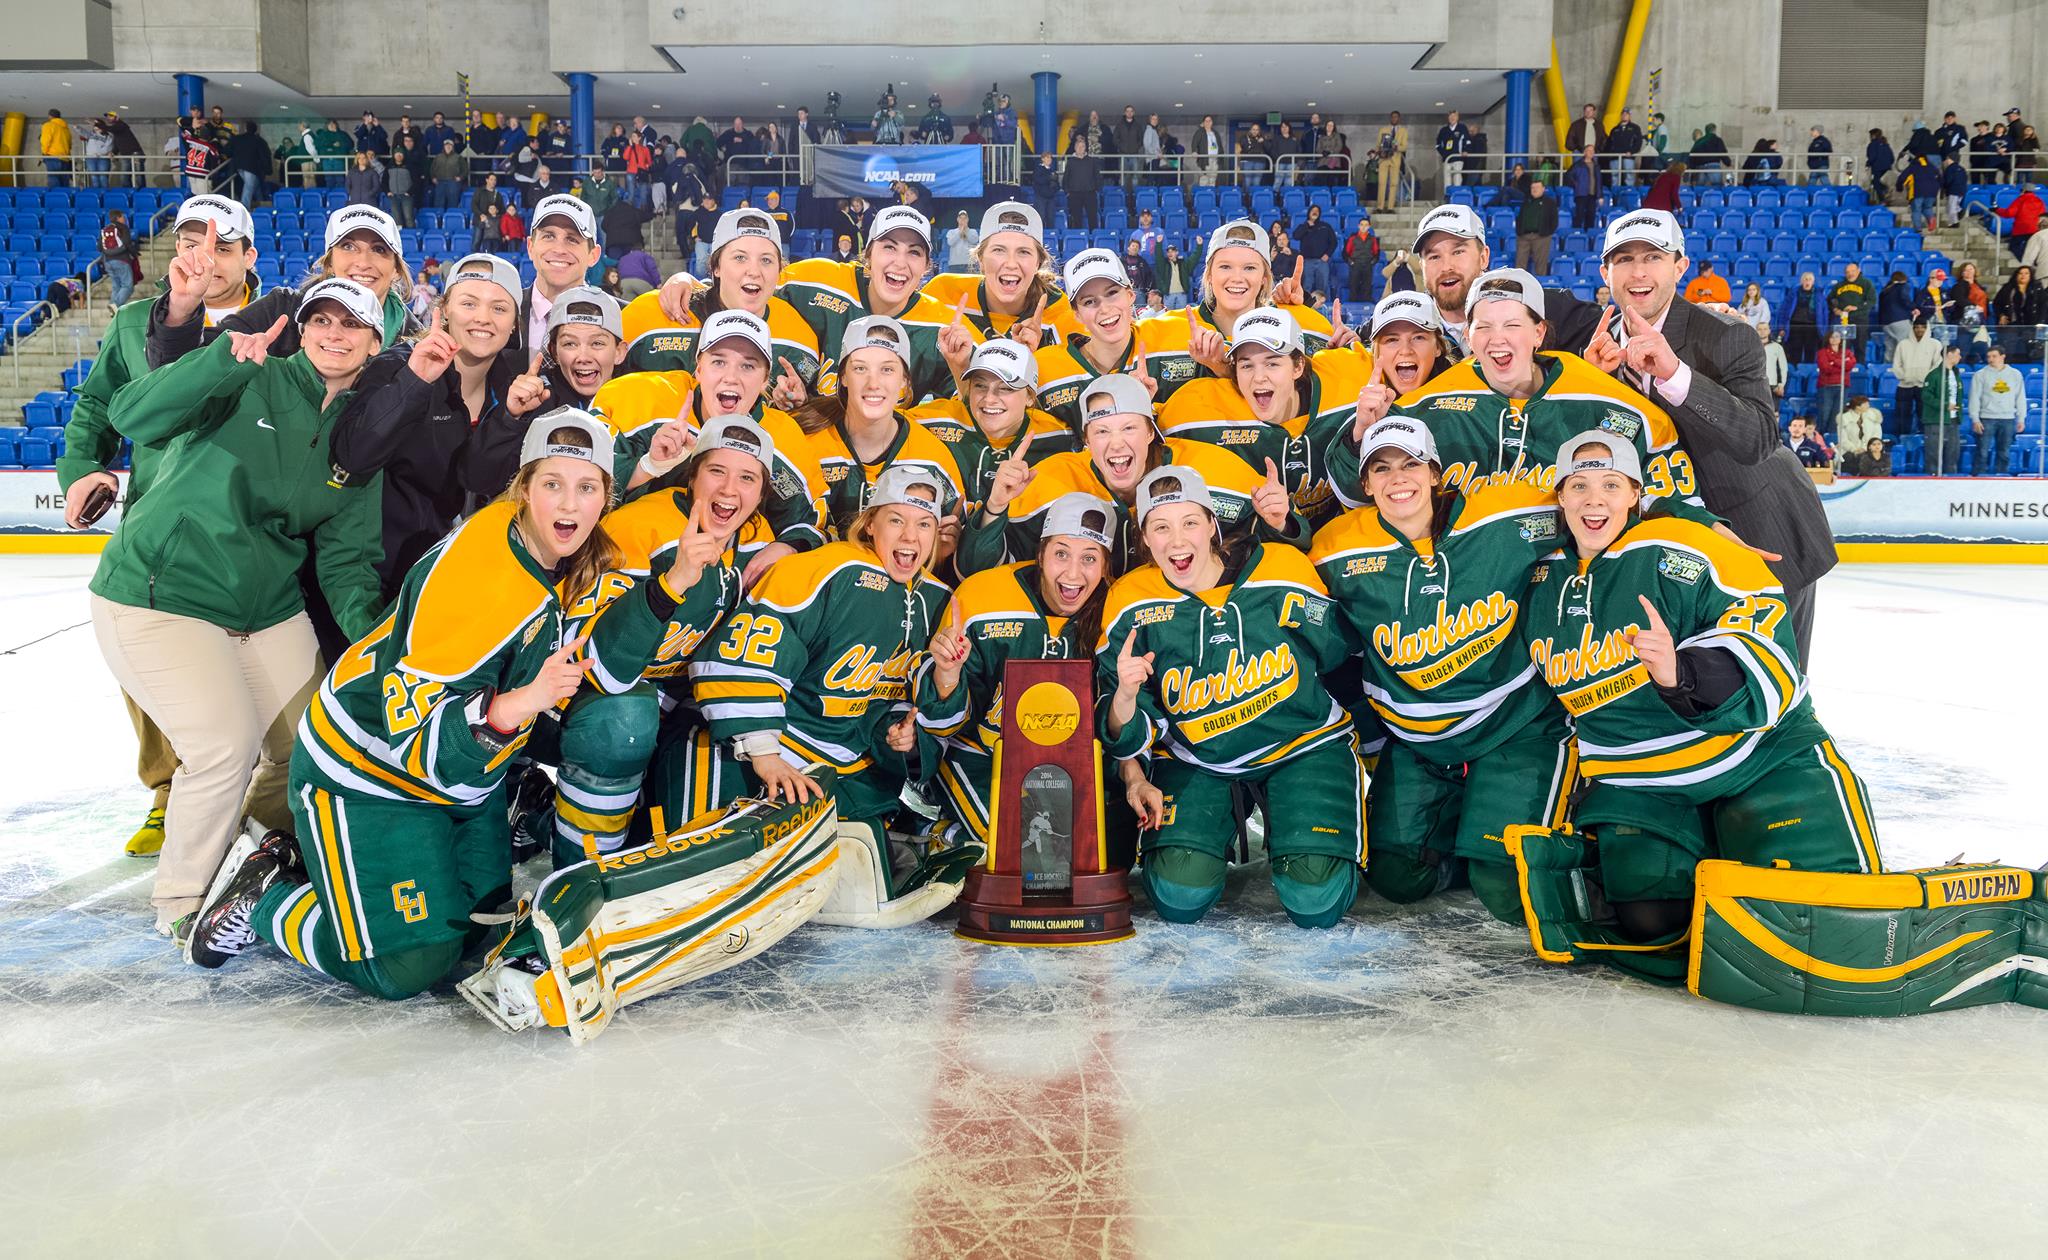 The Clarkson Women's Hockey Team in Spring 2014 after winning the NCAA Championship